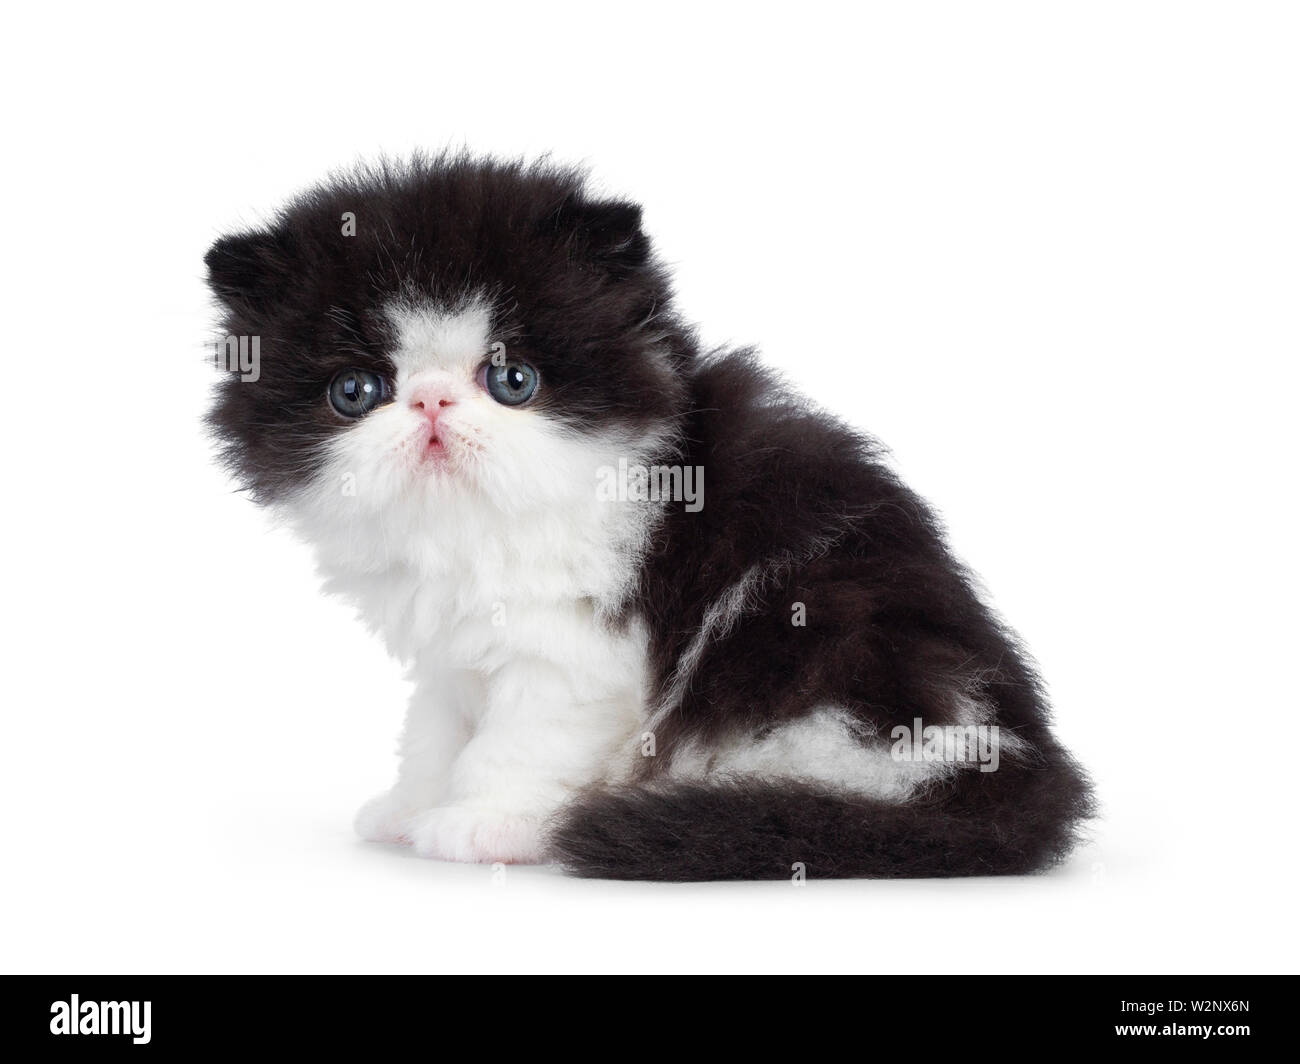 Cute few weeks old, very young black and white Persian cat ktten. Sitting side ways, looking at camera with round and still blue eyes. Isolated on whi Stock Photo